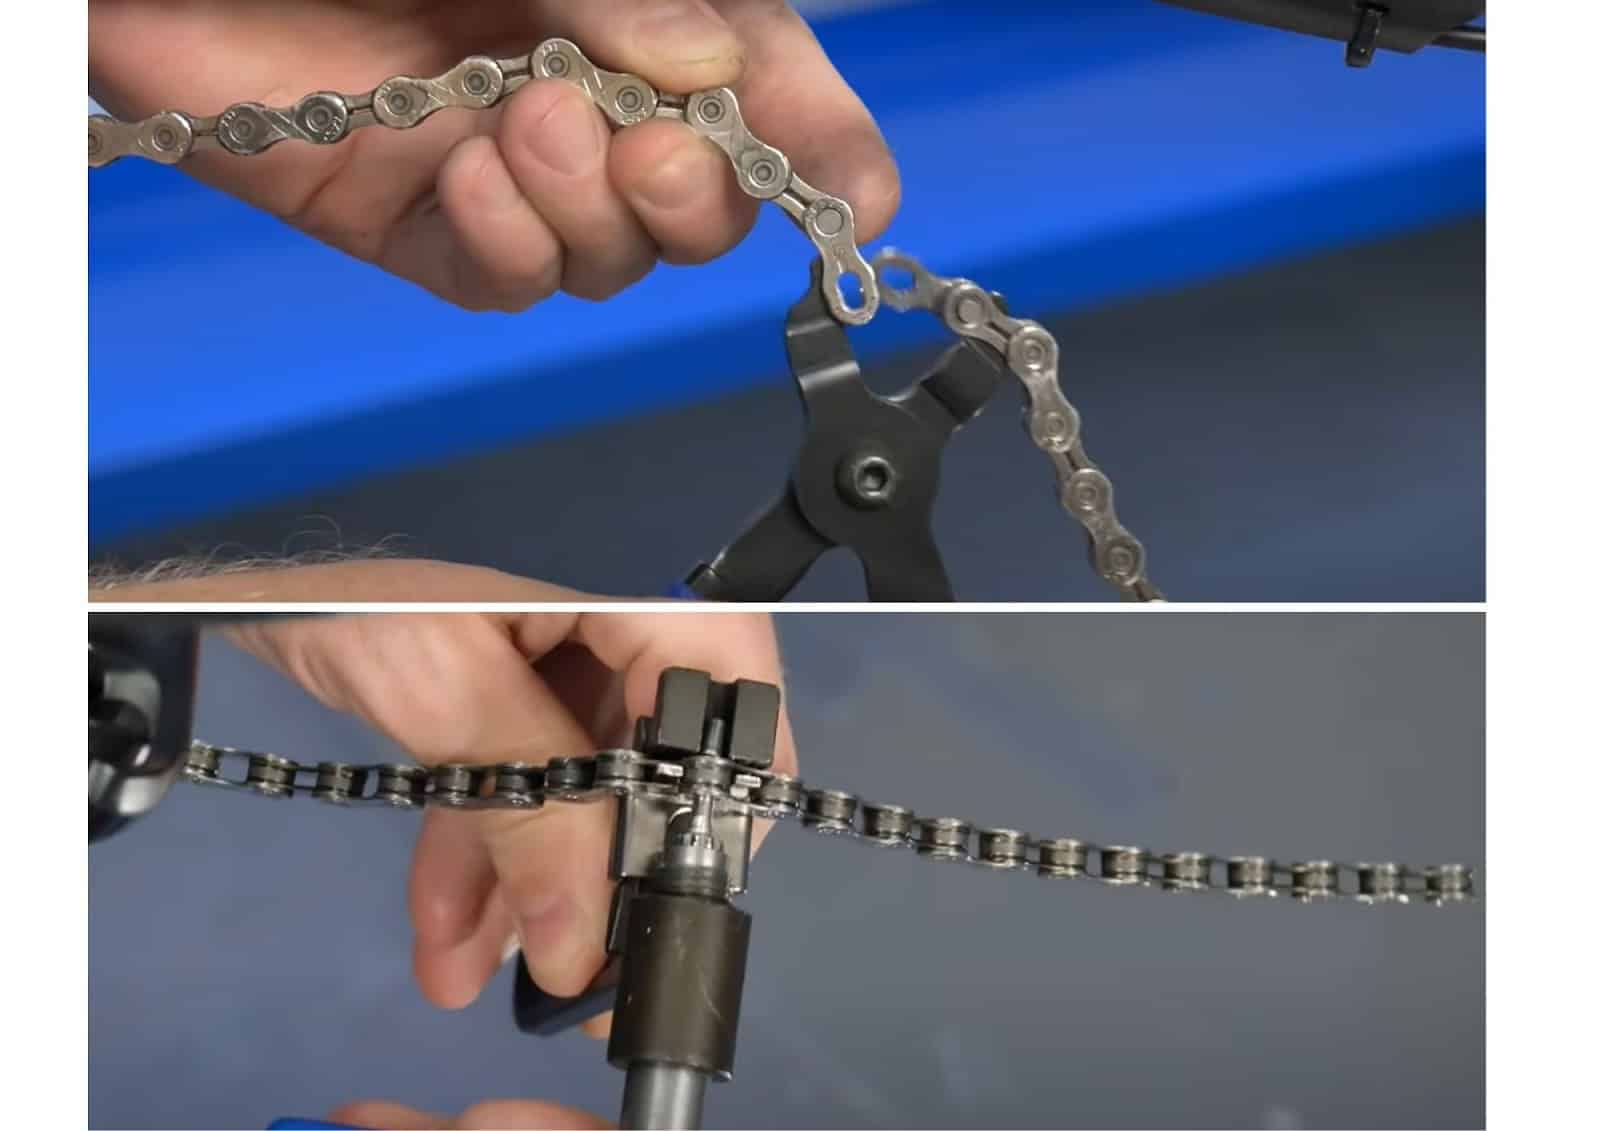 Reconnect the chain once you have positioned it properly.